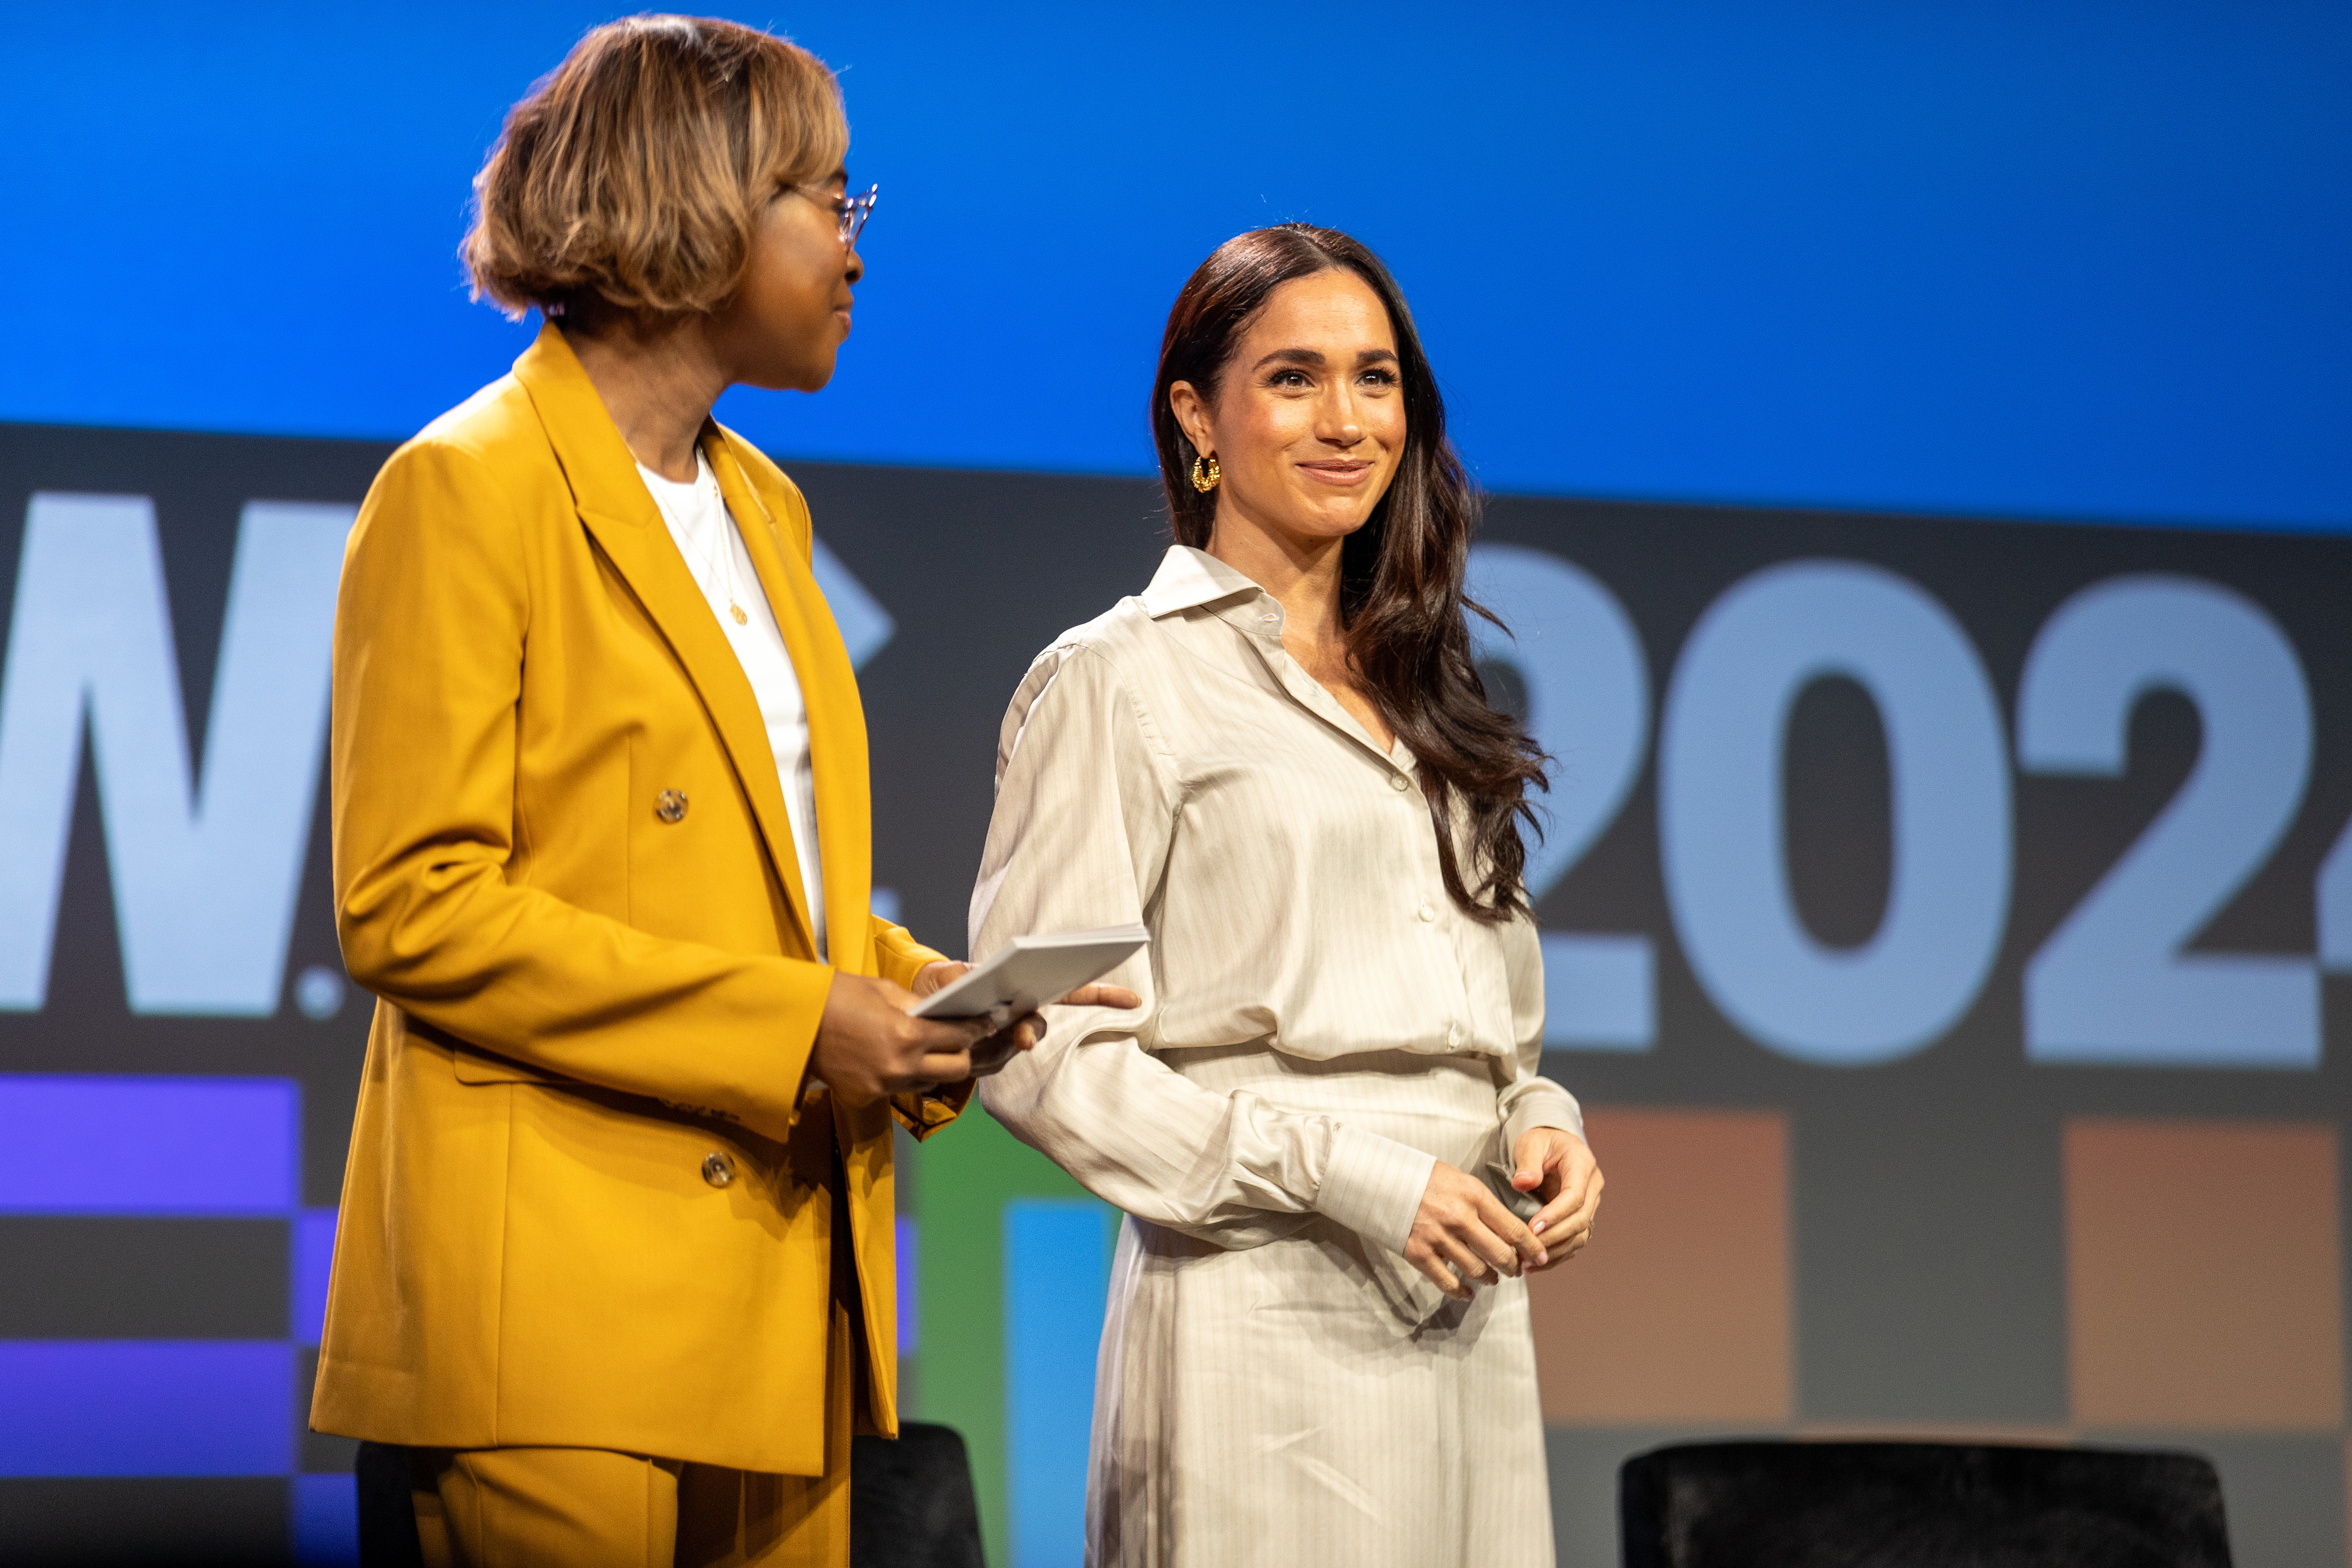 Errin Haine and Meghan Markle bei der Veranstaltung "Breaking Barriers, Shaping Narratives: How Women Lead On and Off the Screen" während der 2024 SXSW Conference and Festival im Austin Convention Center am 8. März 2024 in Austin, Texas. | Quelle: Getty Images